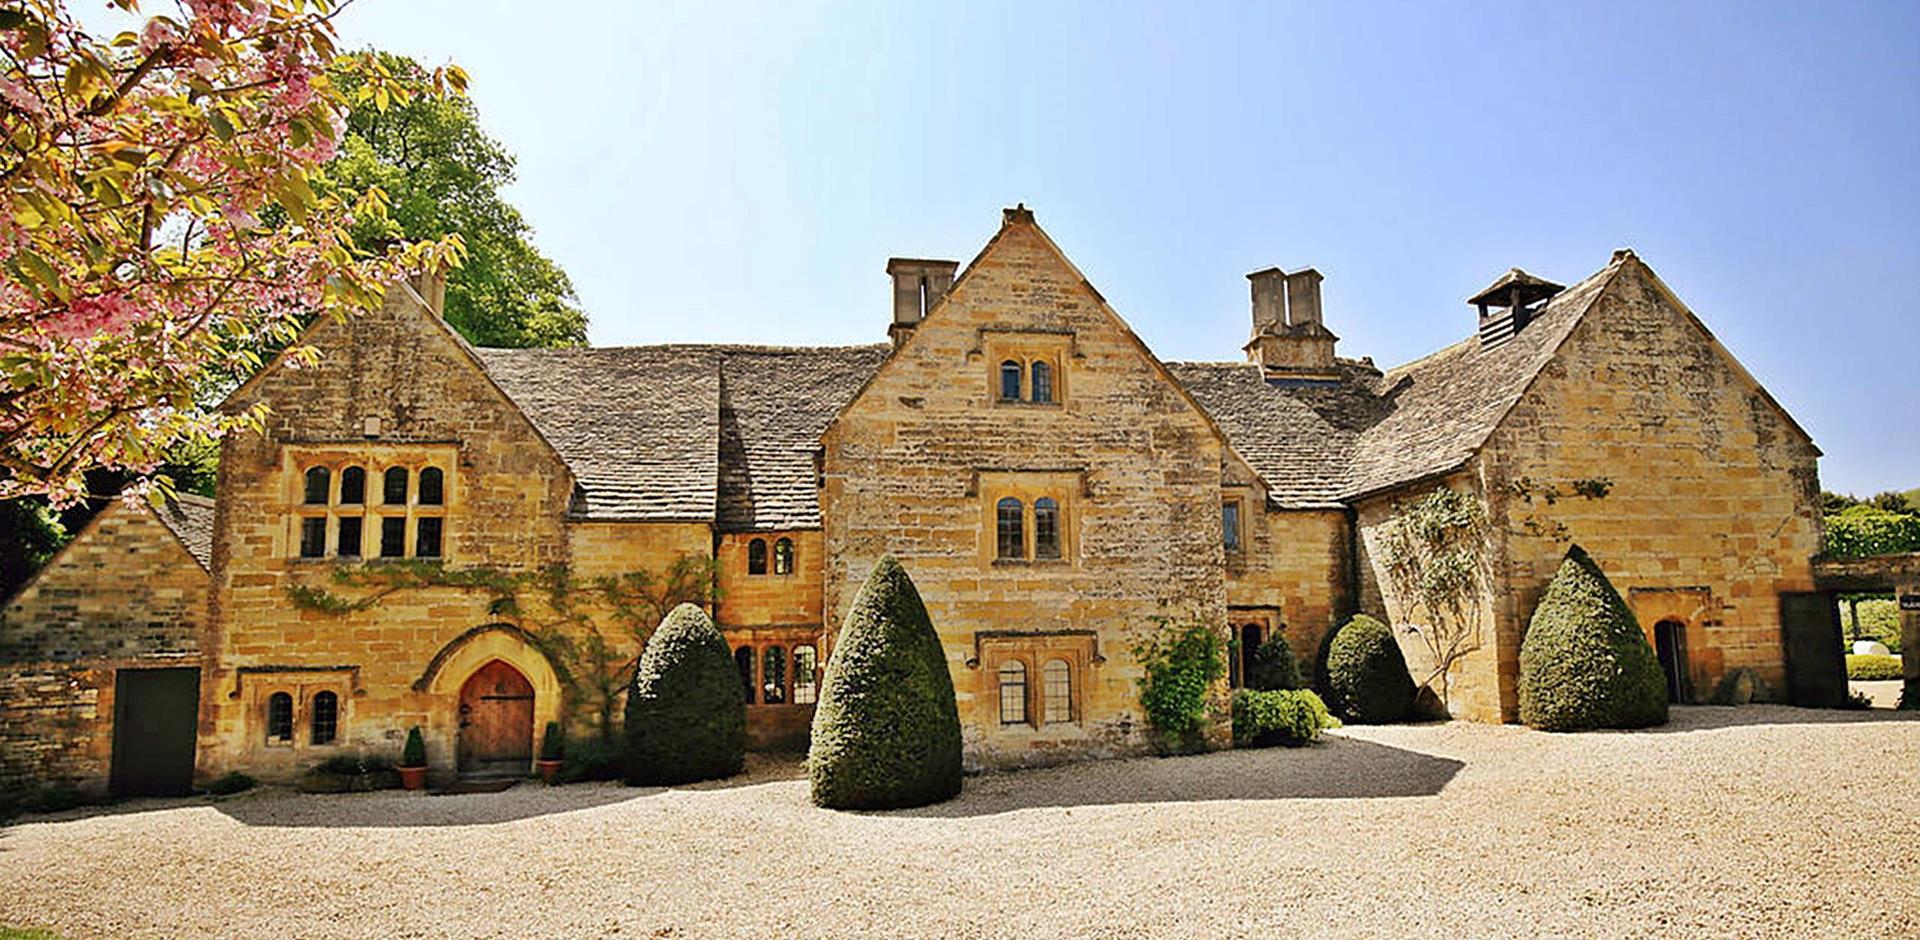 Exterior, Temple Guiting Manor, Cotswolds